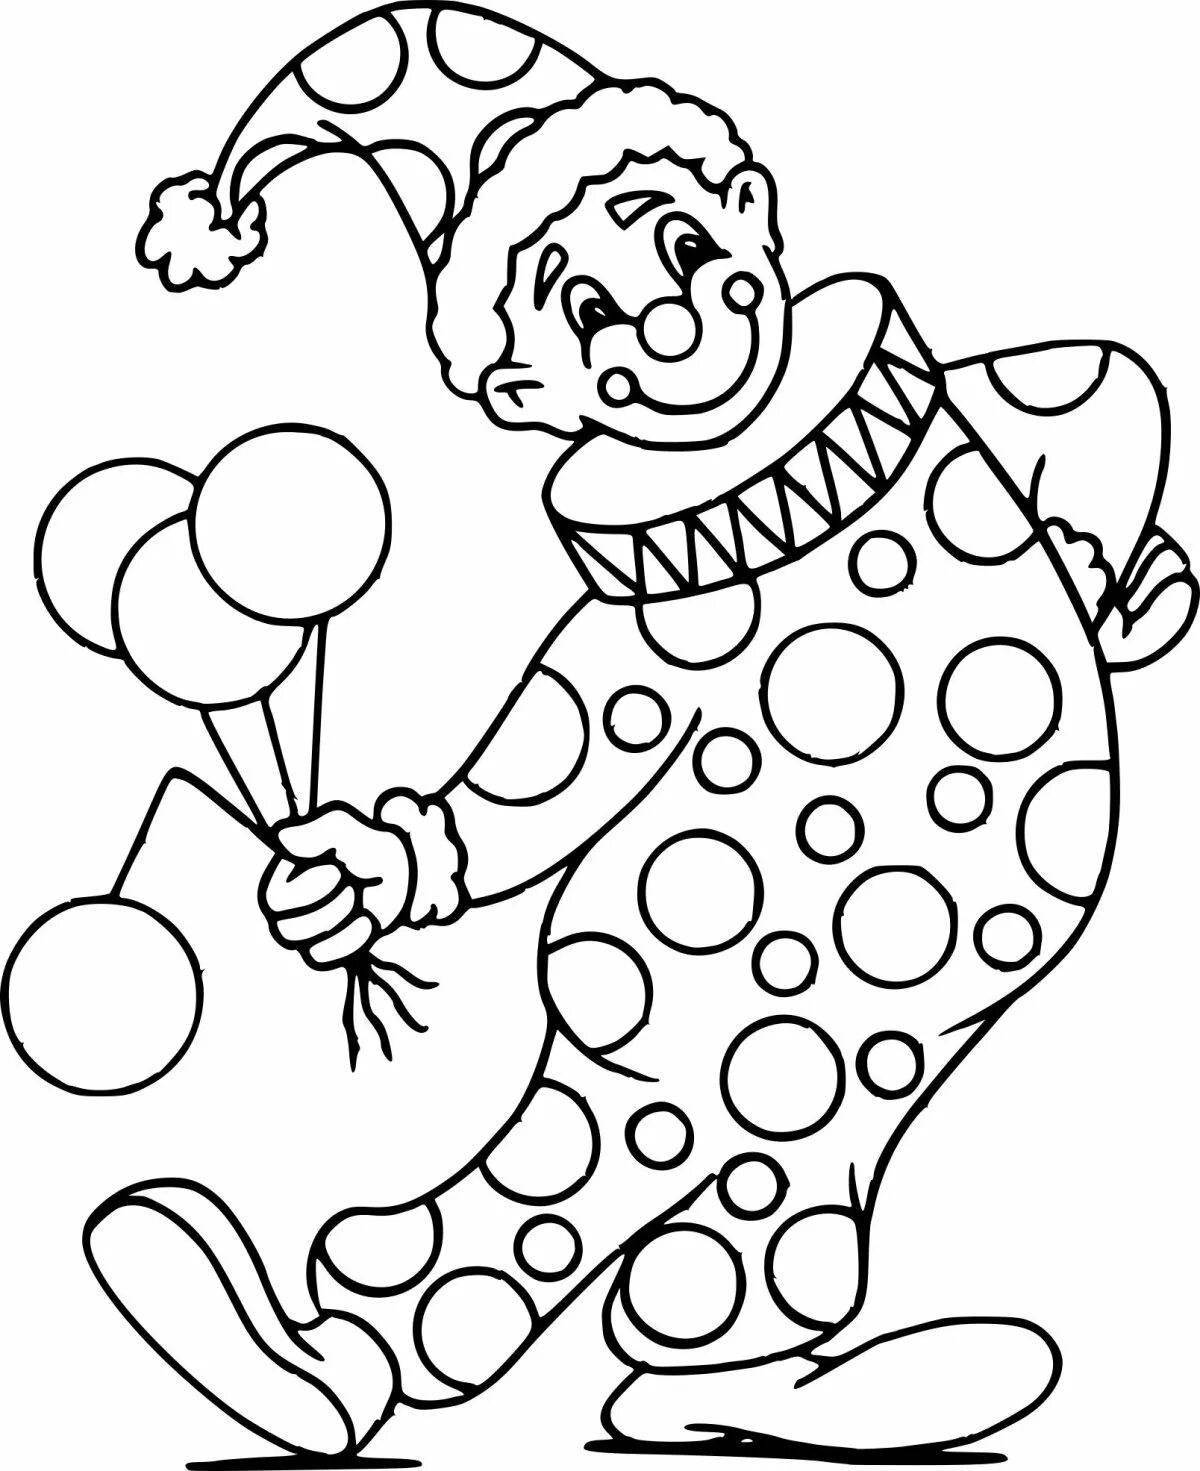 Crazy clown coloring book for 6-7 year olds